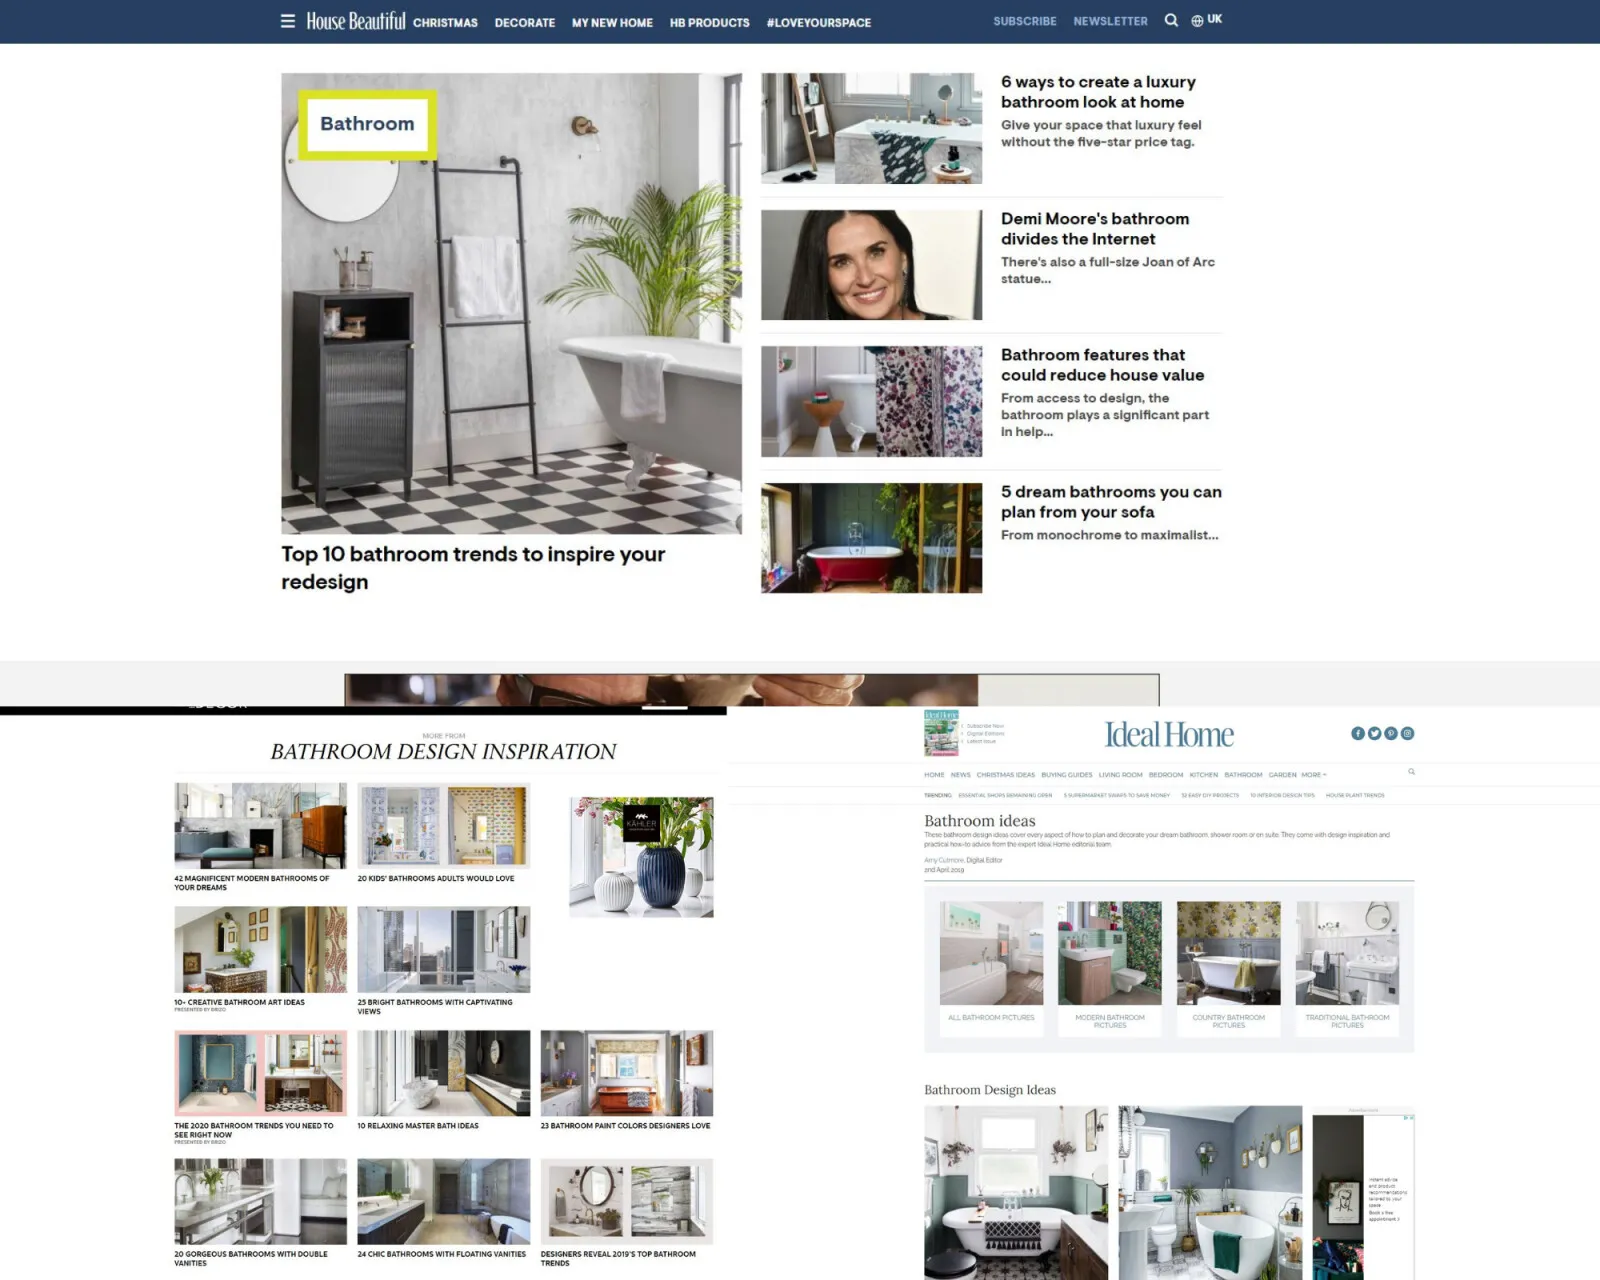 Screenshots of the House Beautiful, Bathroom Design Inspiration and Ideal Home websites